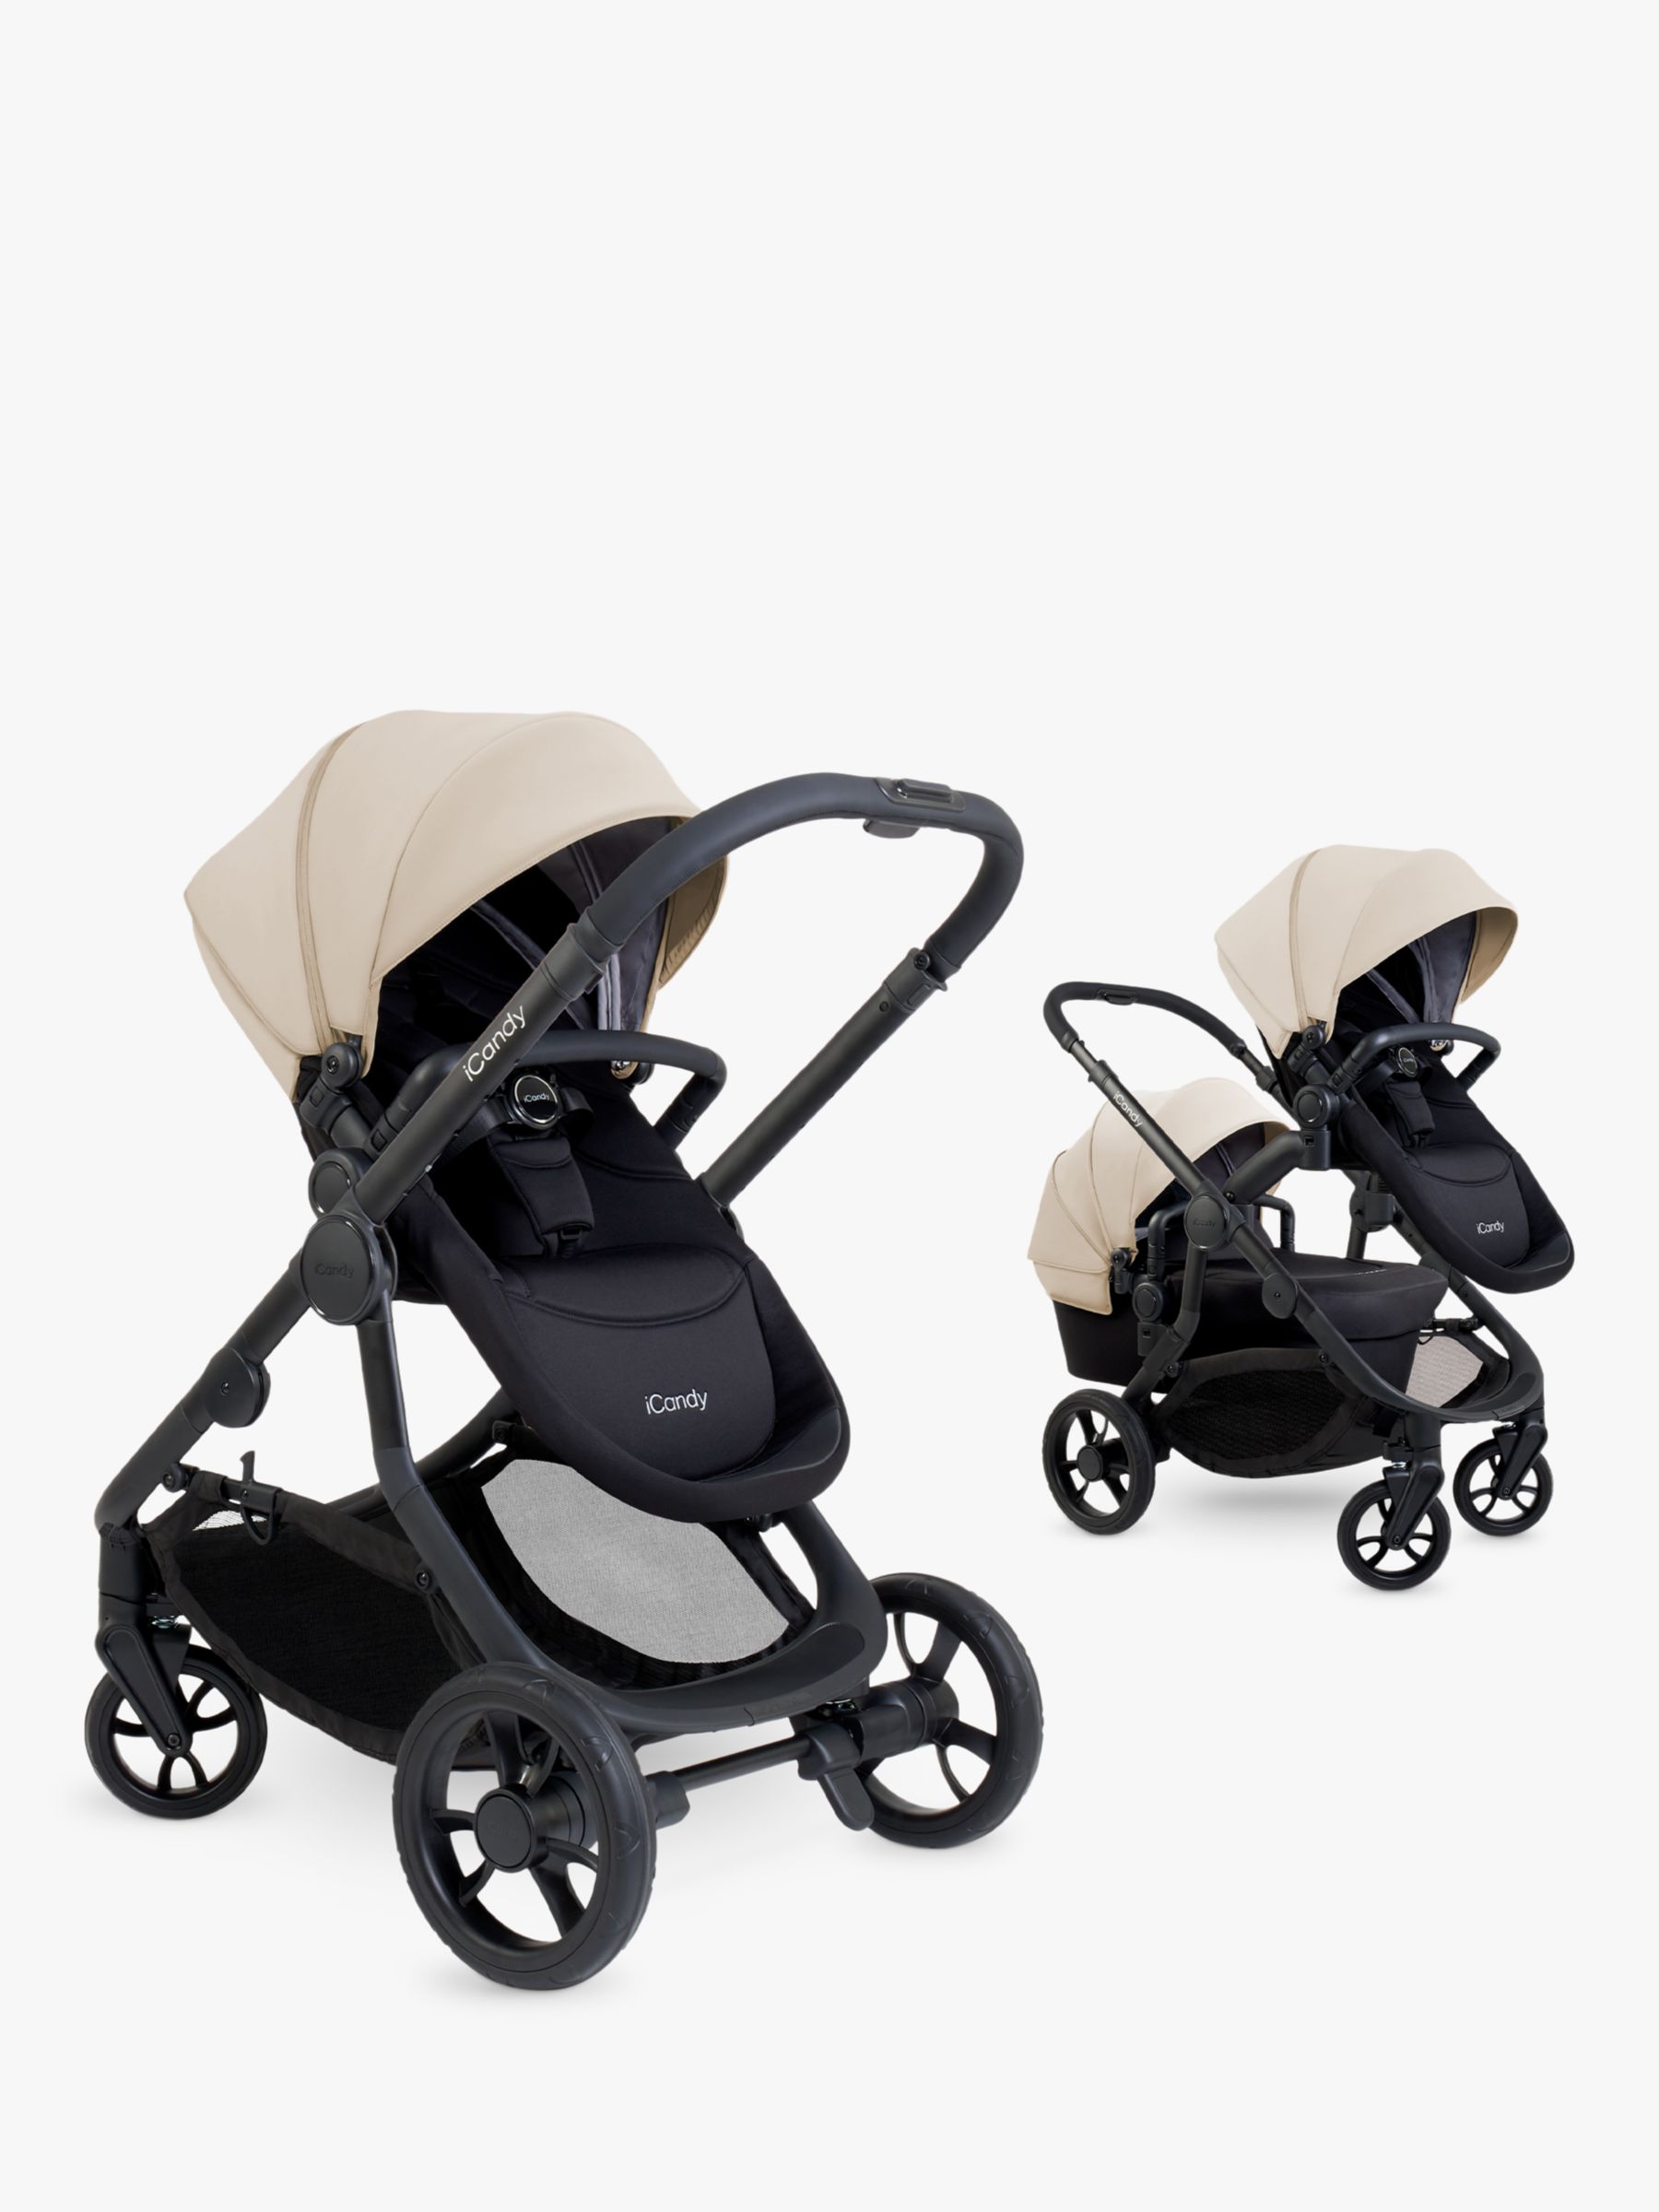 iCandy 4 Pushchair, Carrycot & Rain Cover Bundle Pack